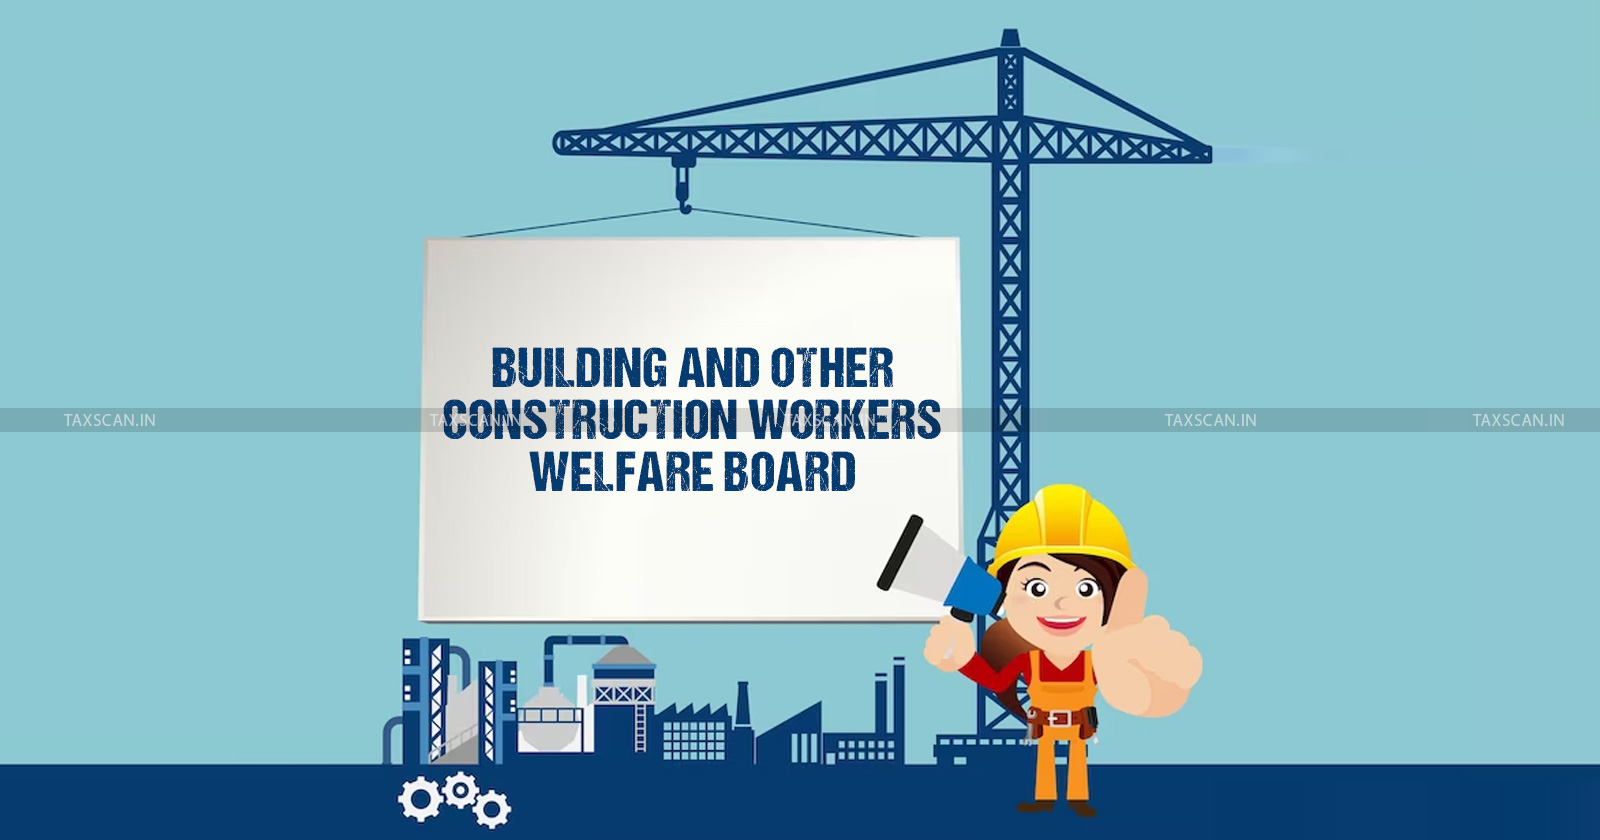 Telangana Building - Construction Workers Welfare Board- exempted - Income Tax -Notifies CBDT-TAXSCANN